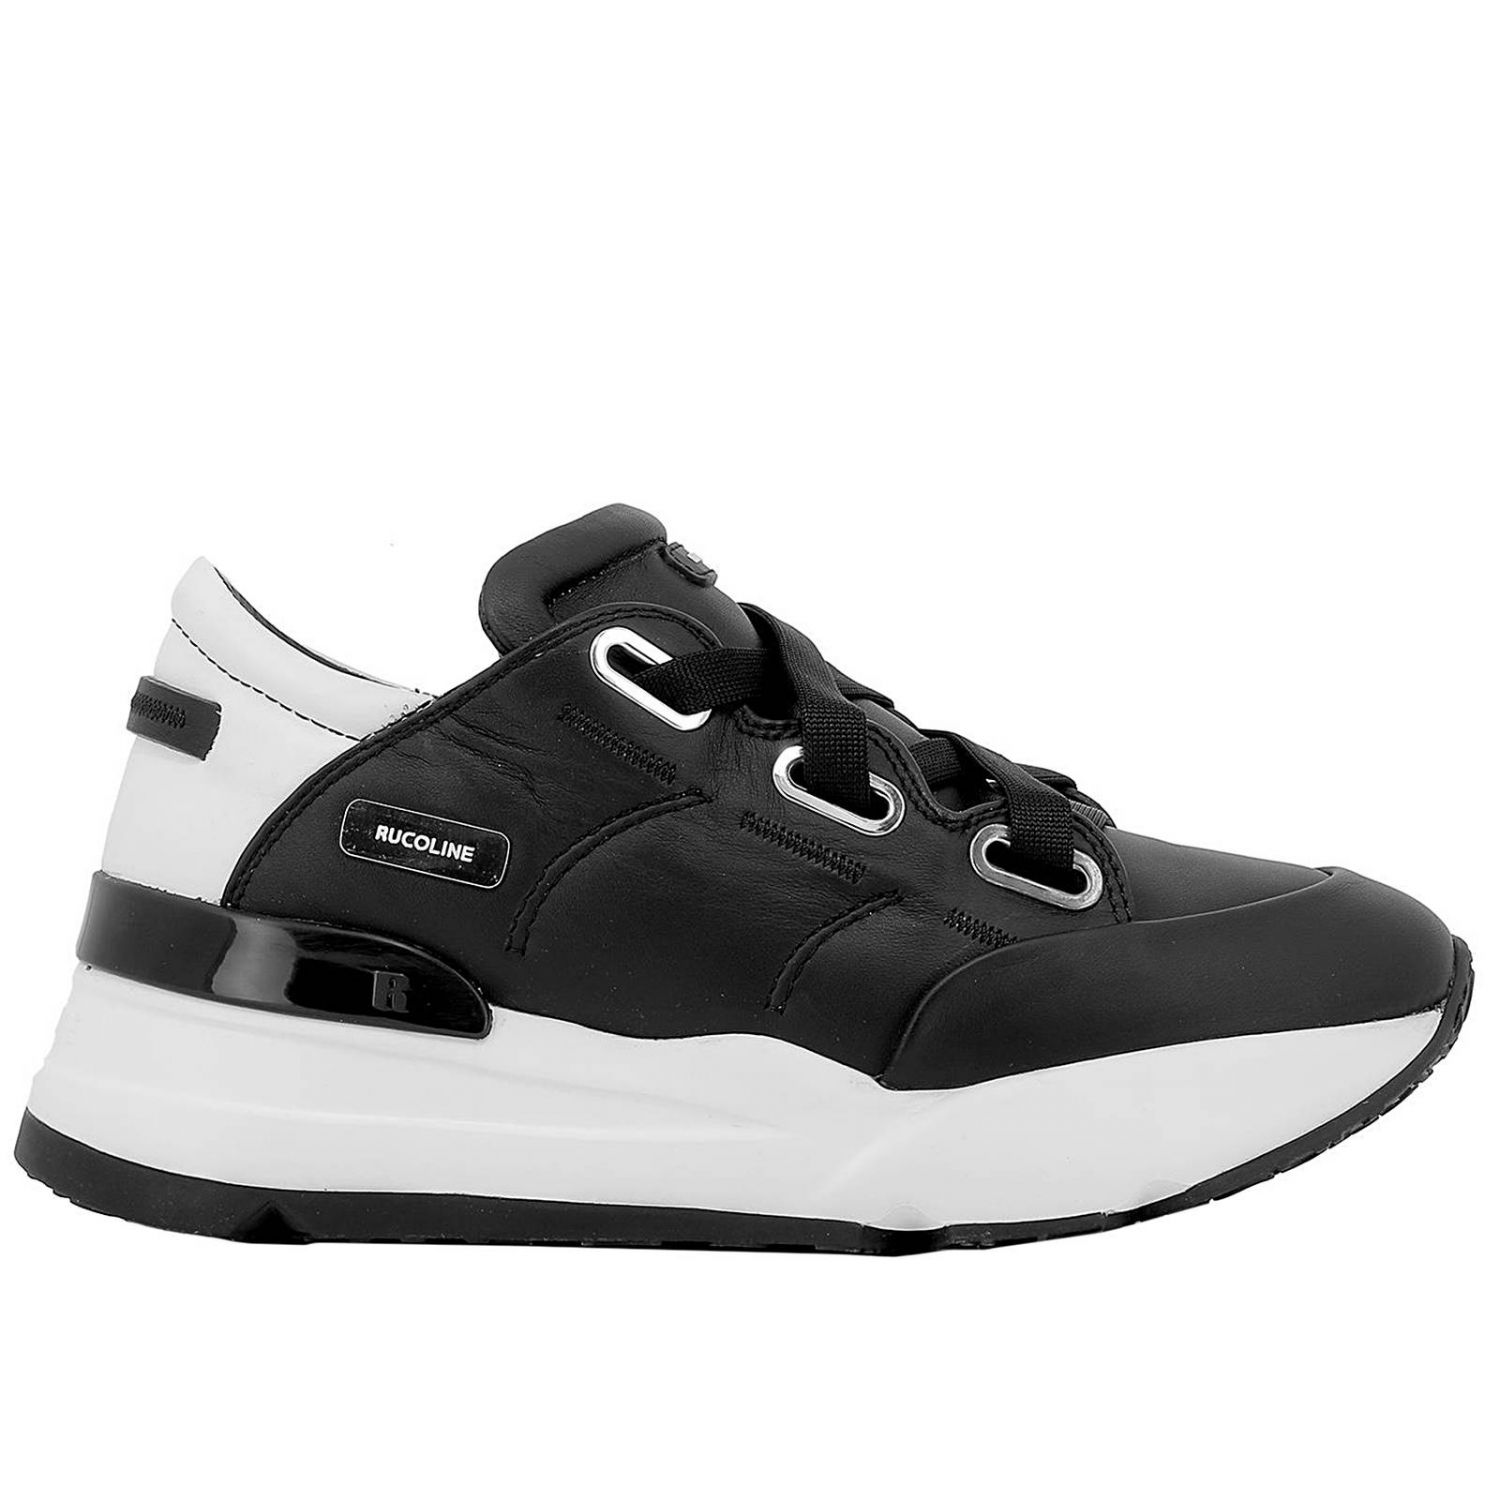 RUCOLINE Outlet: Sneakers women - Black | RUCOLINE sneakers 4038 online ...